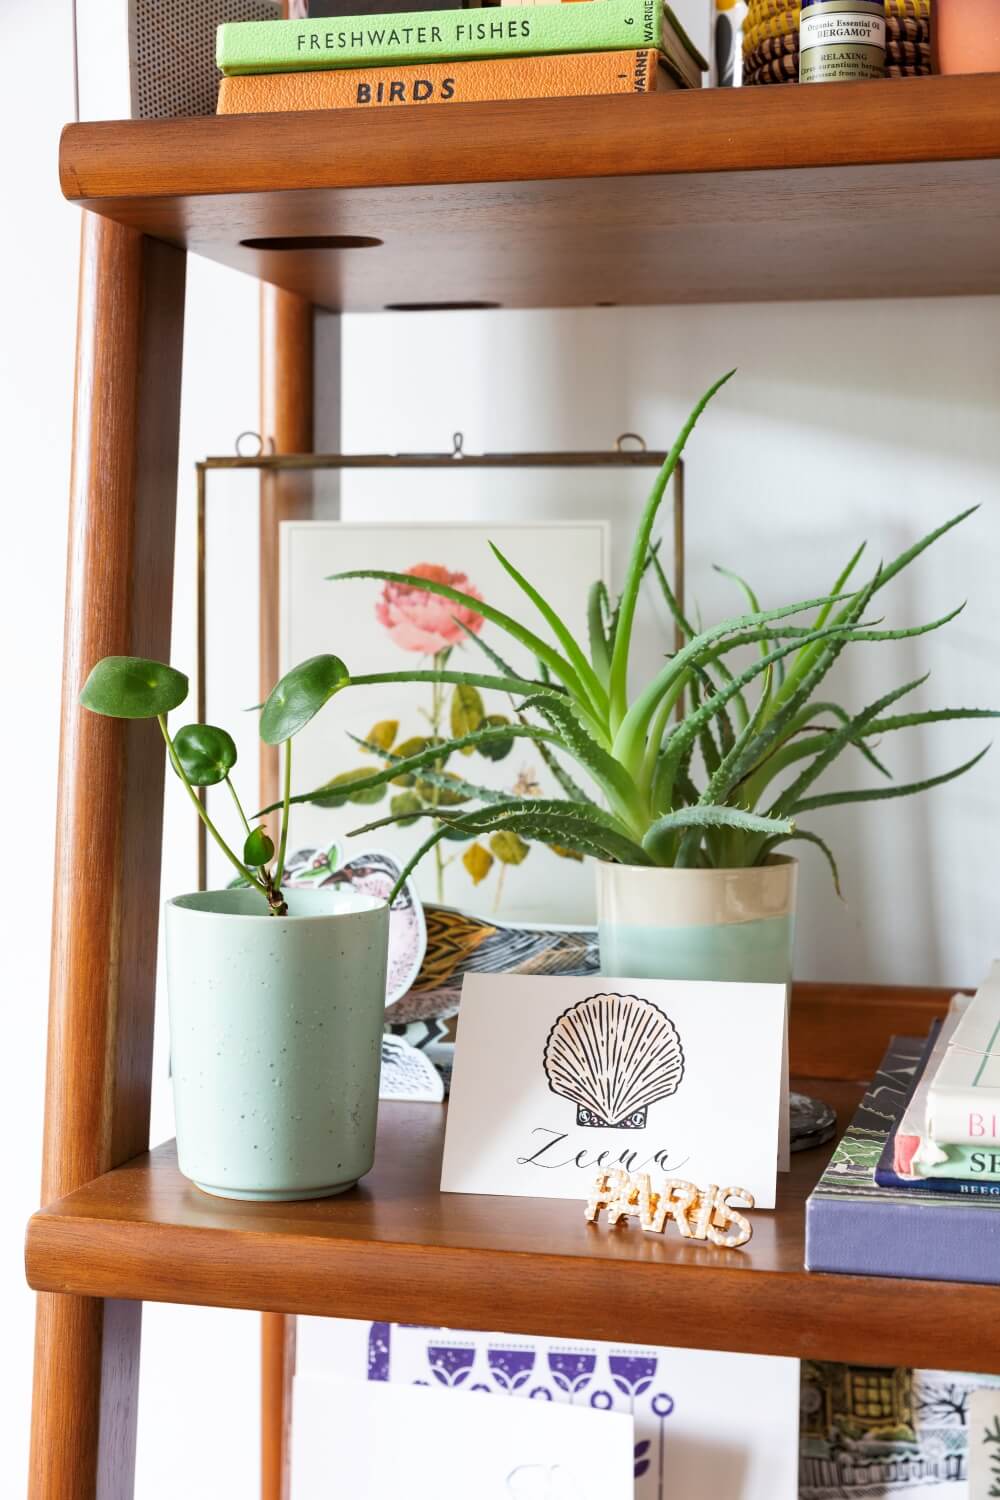 A close up of decorative items on west elm shelf. Items include indoor plants, and books